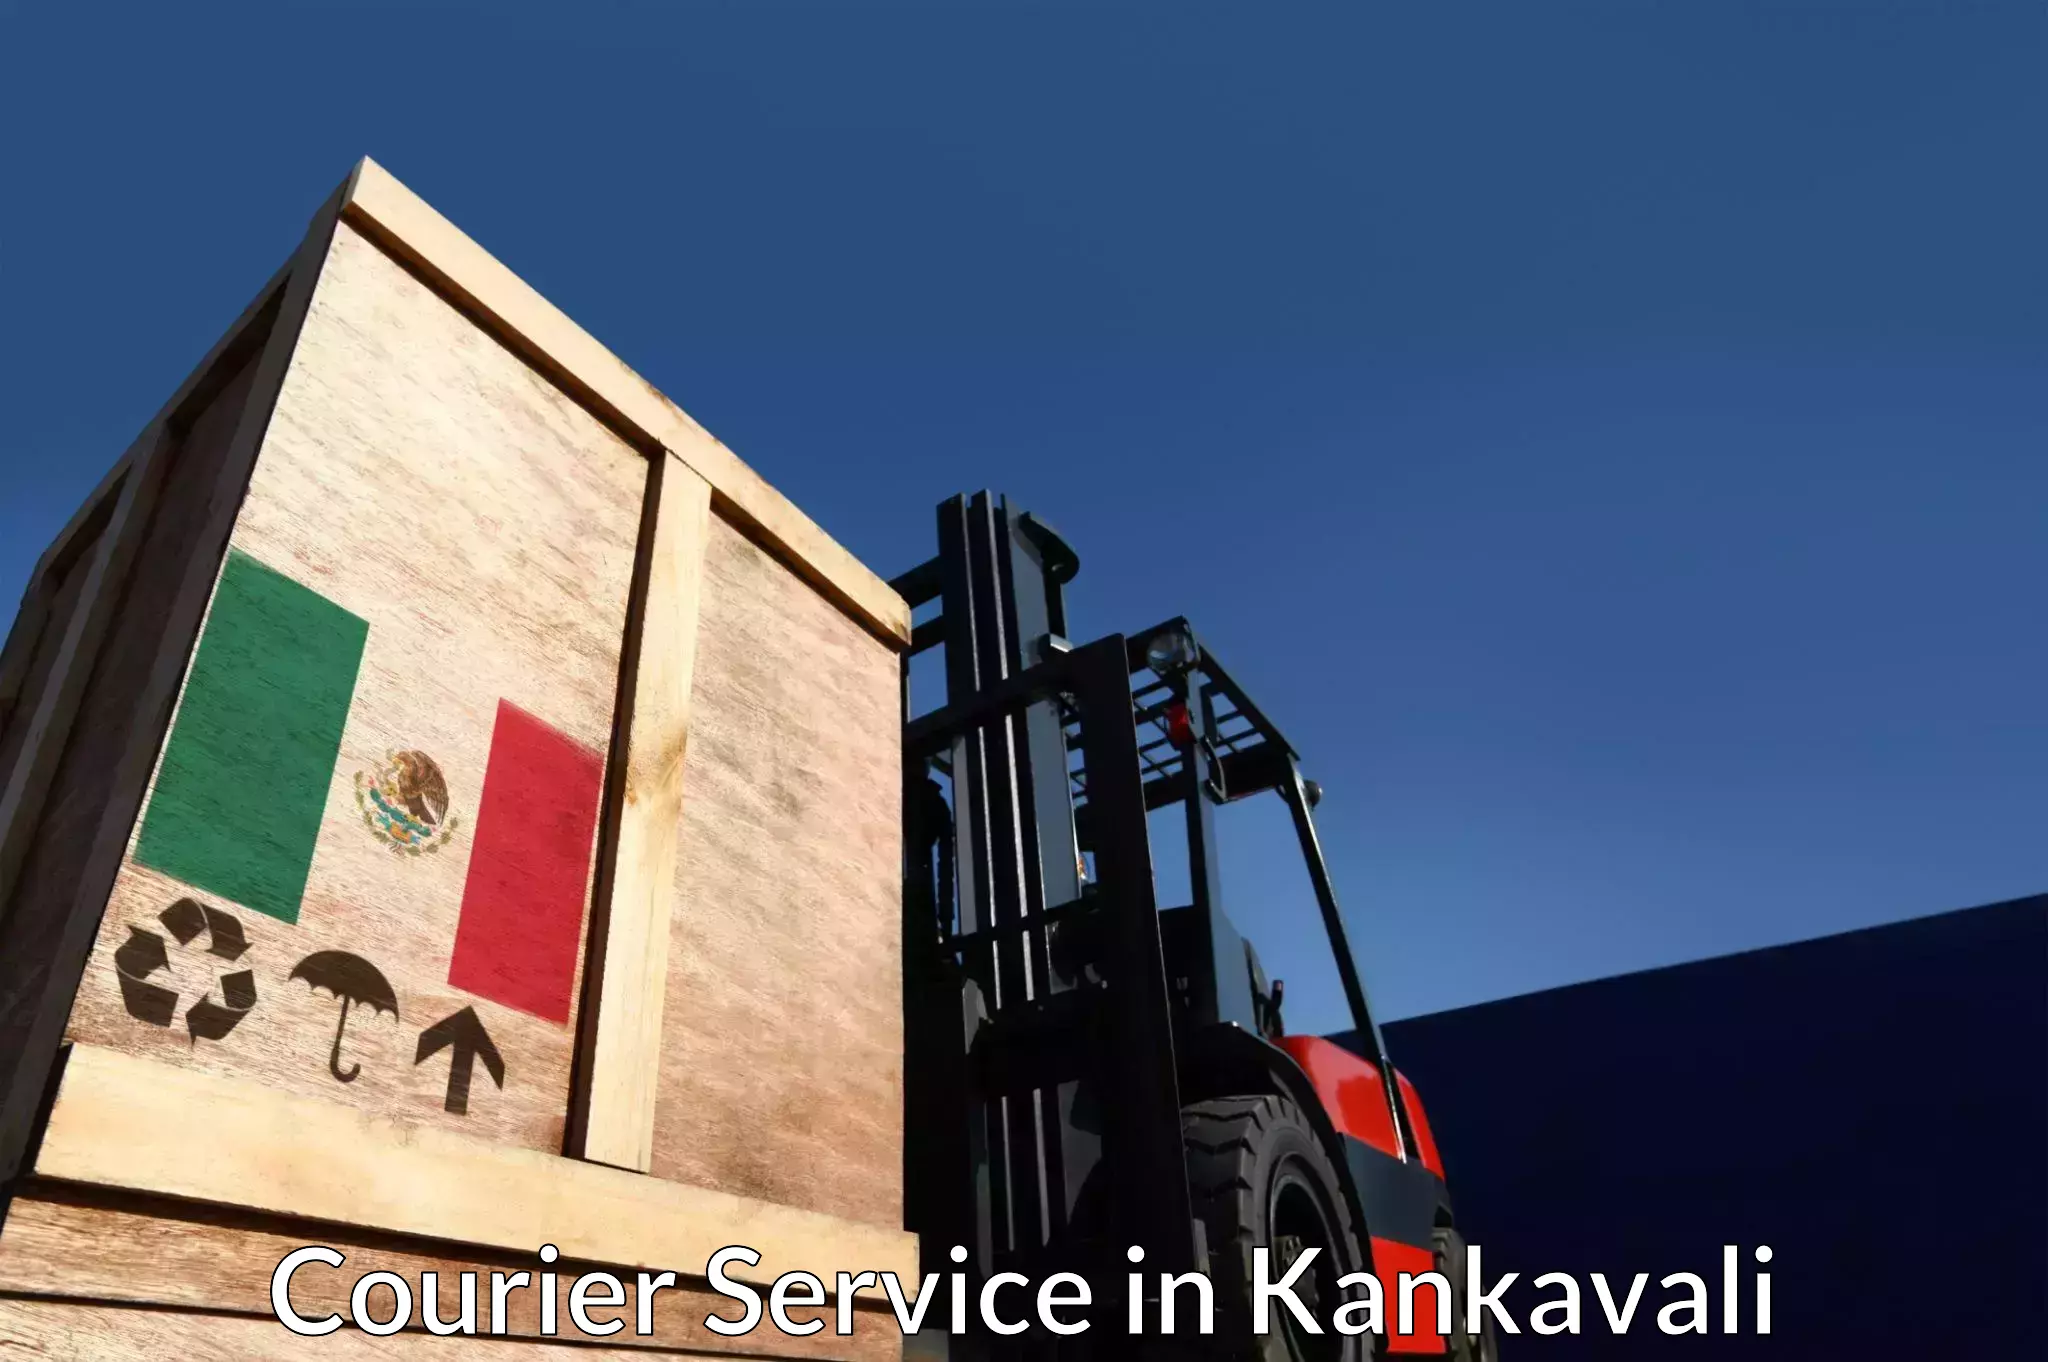 Scheduled delivery in Kankavali